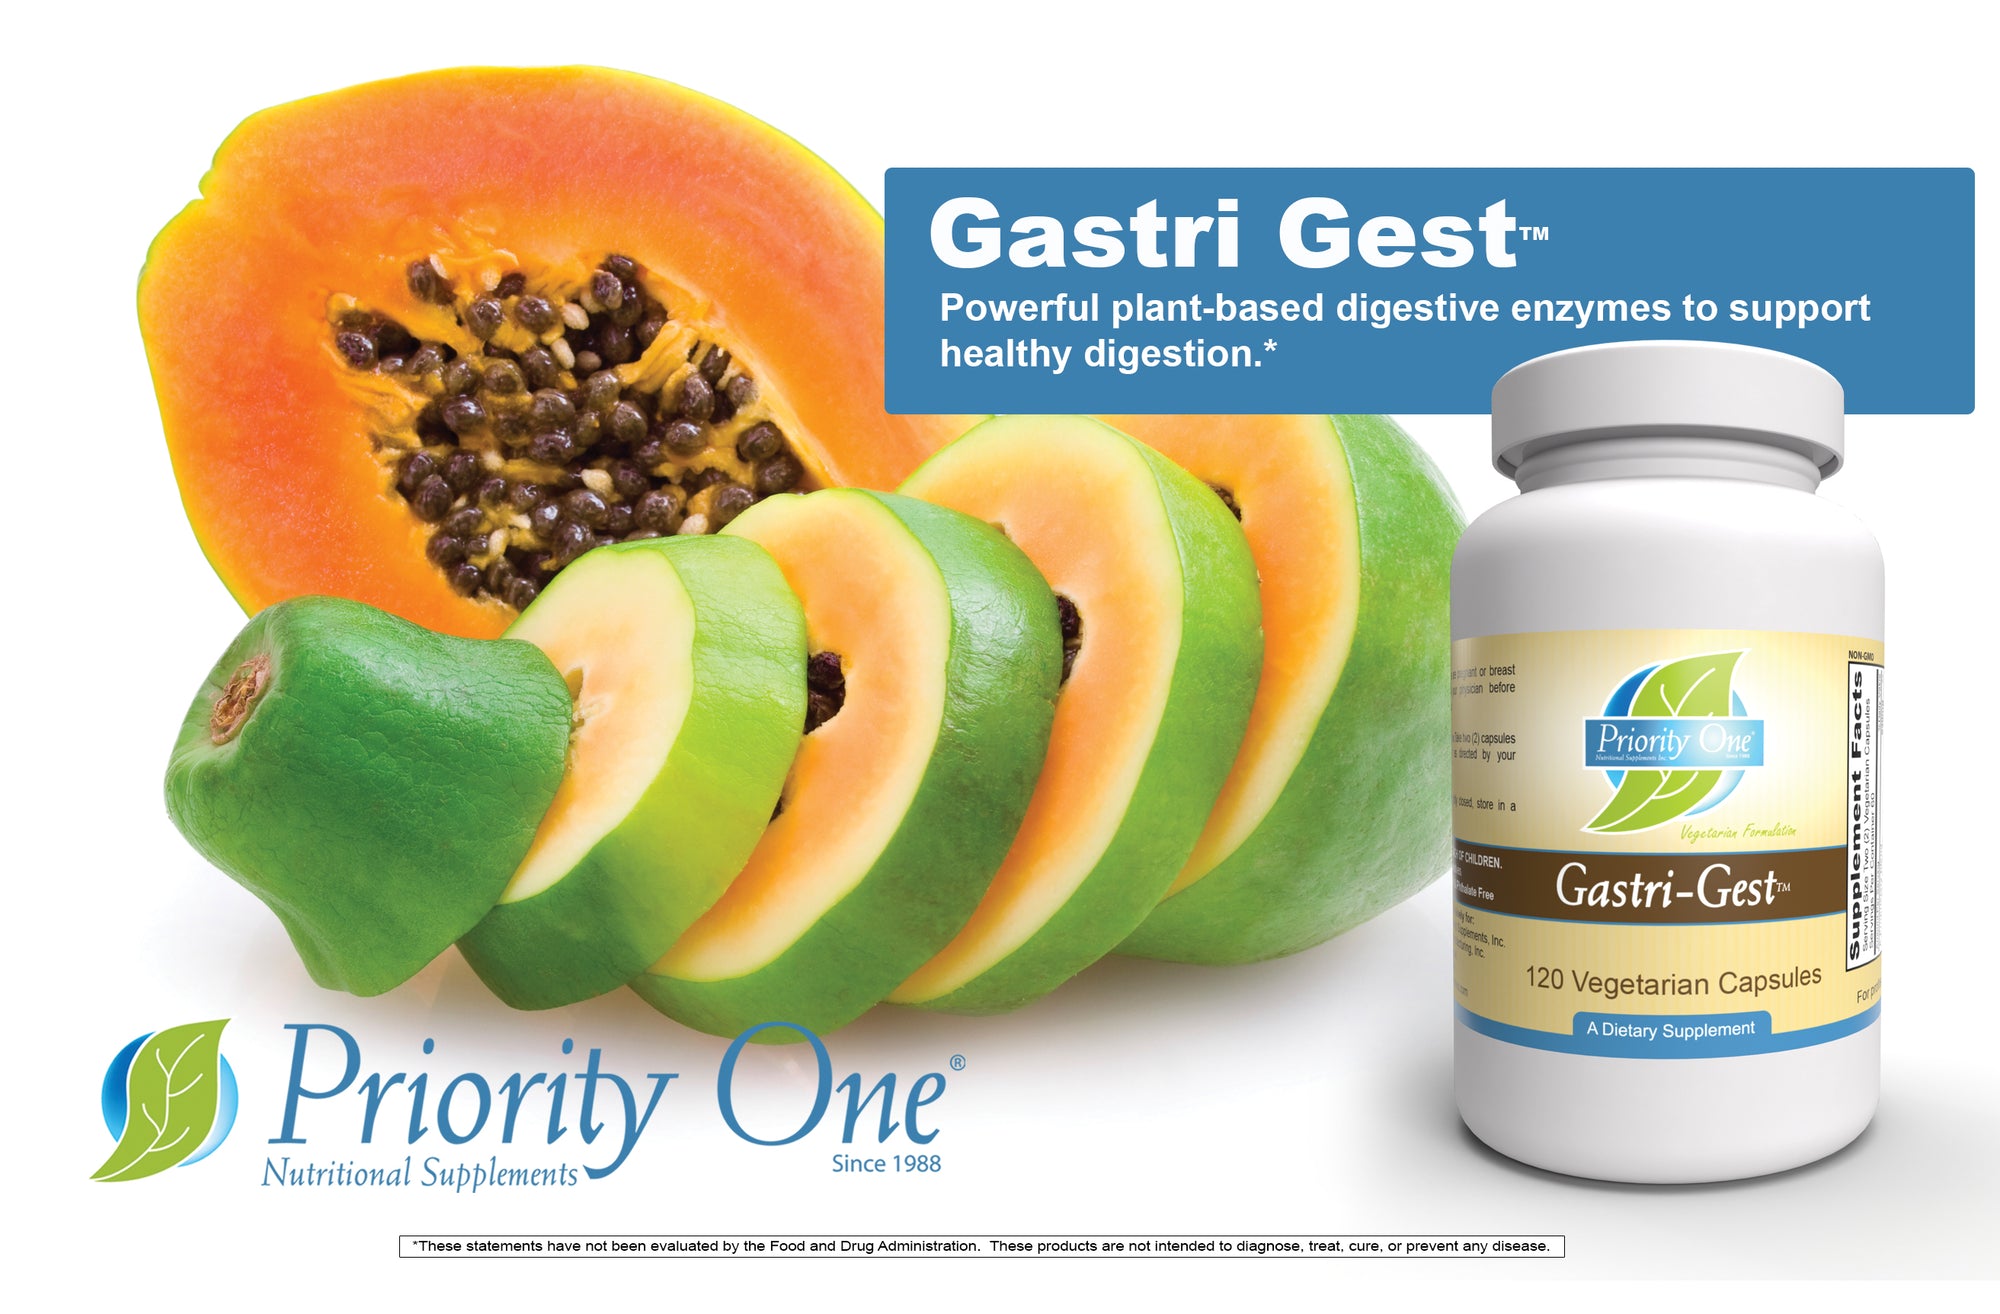 Gastri-Gest™ - Plant-based digestive enzymes to help maintain healthy digestion and intestinal enzyme activity.*